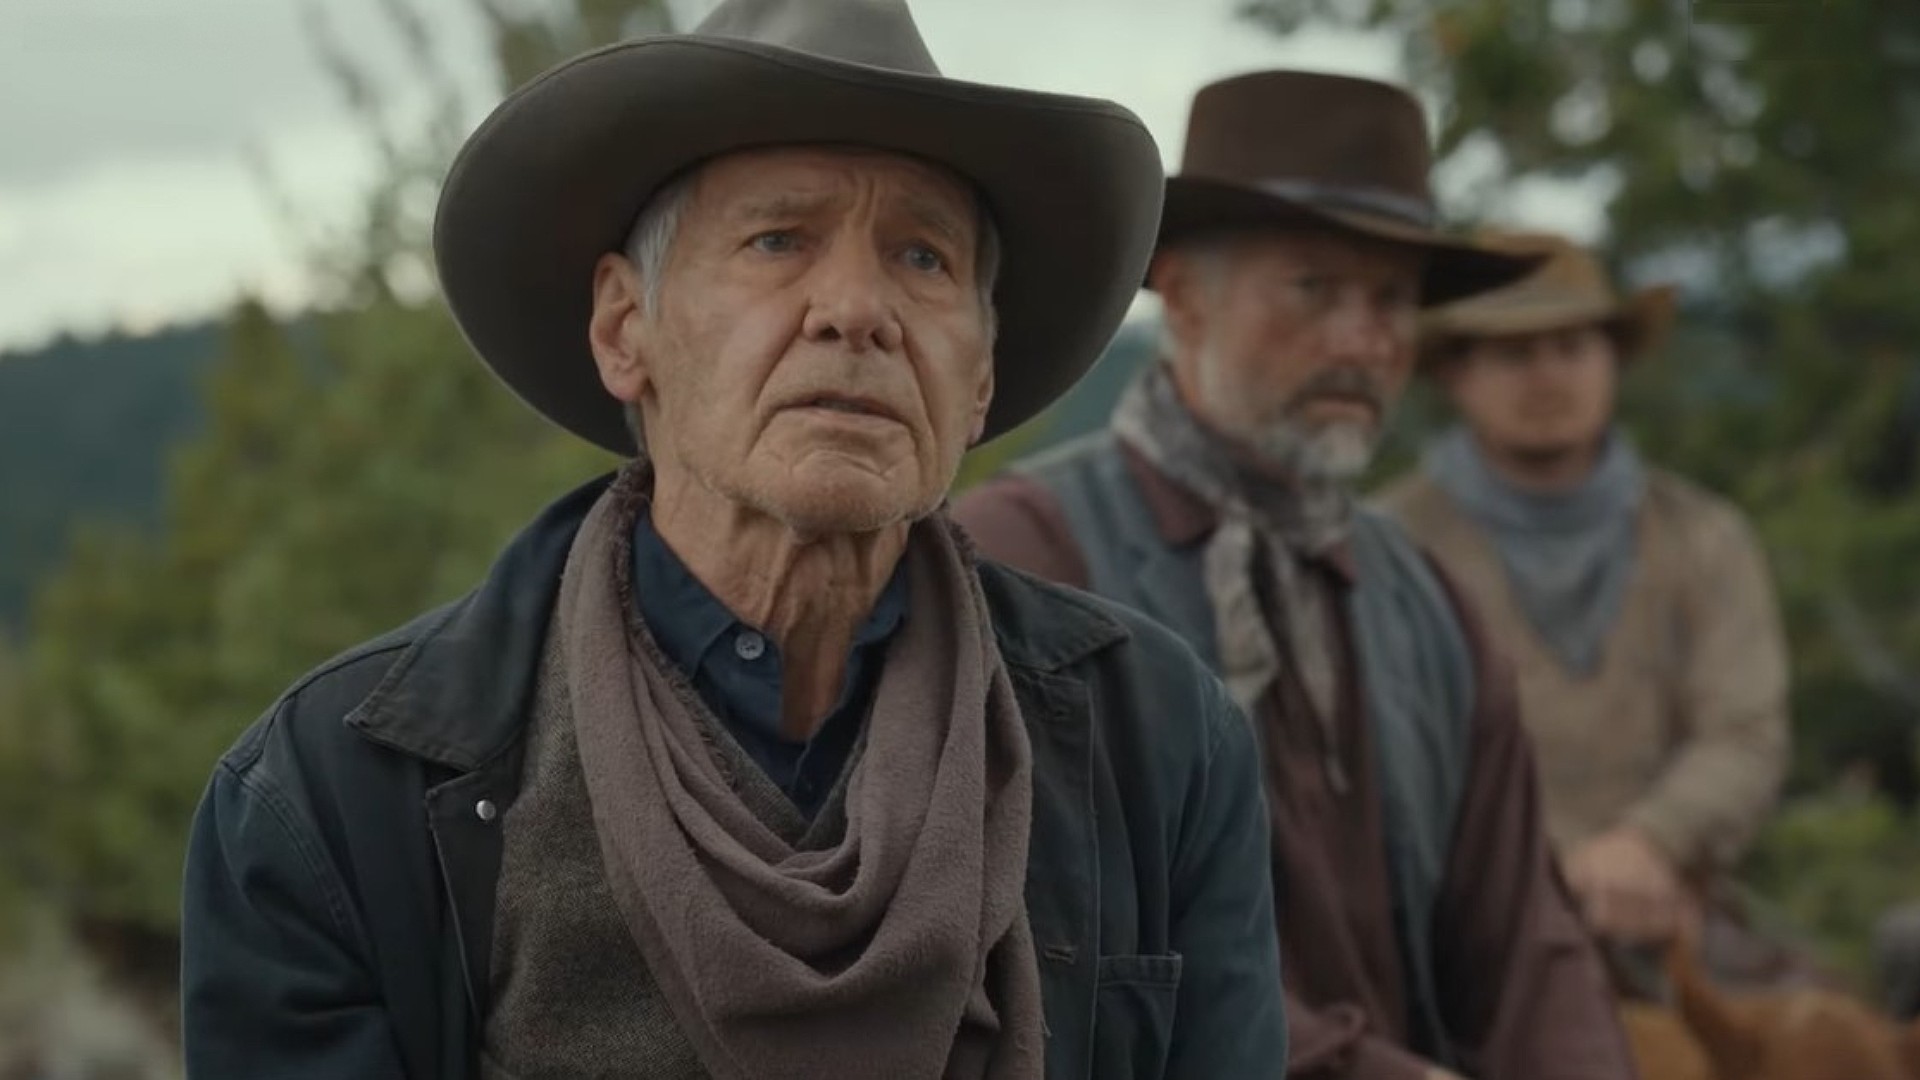 First 1923 trailer teases dramatic Yellowstone origin story, as Harrison Ford's Jacob Dutton wages war